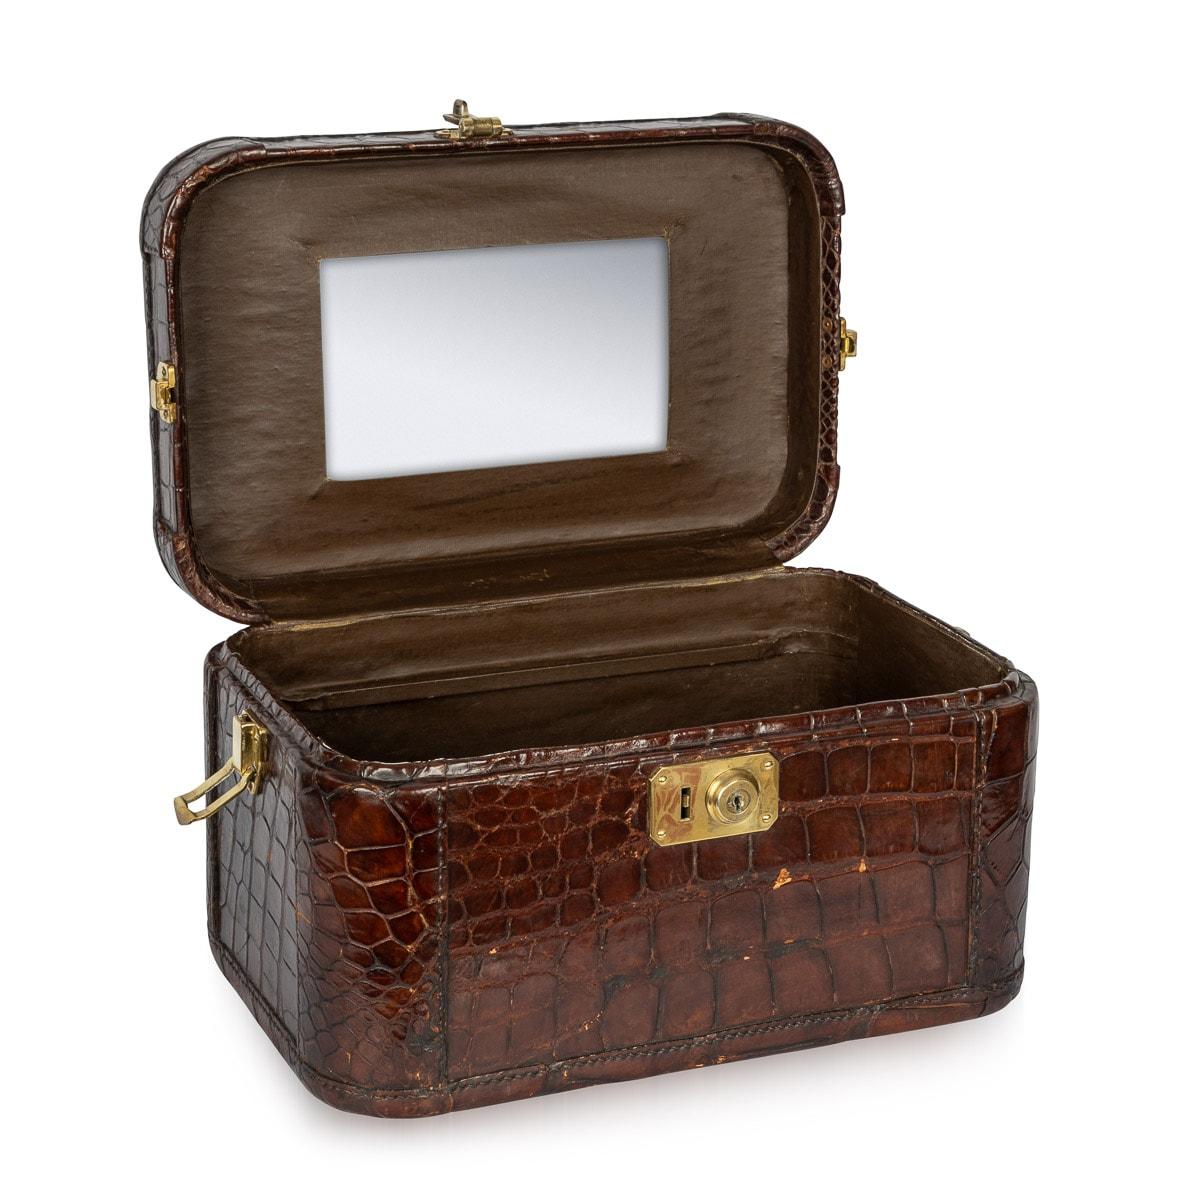 20th Century Gucci Crocodile Leather & Brass Overnight Travel Vanity Case c.1960 For Sale 1